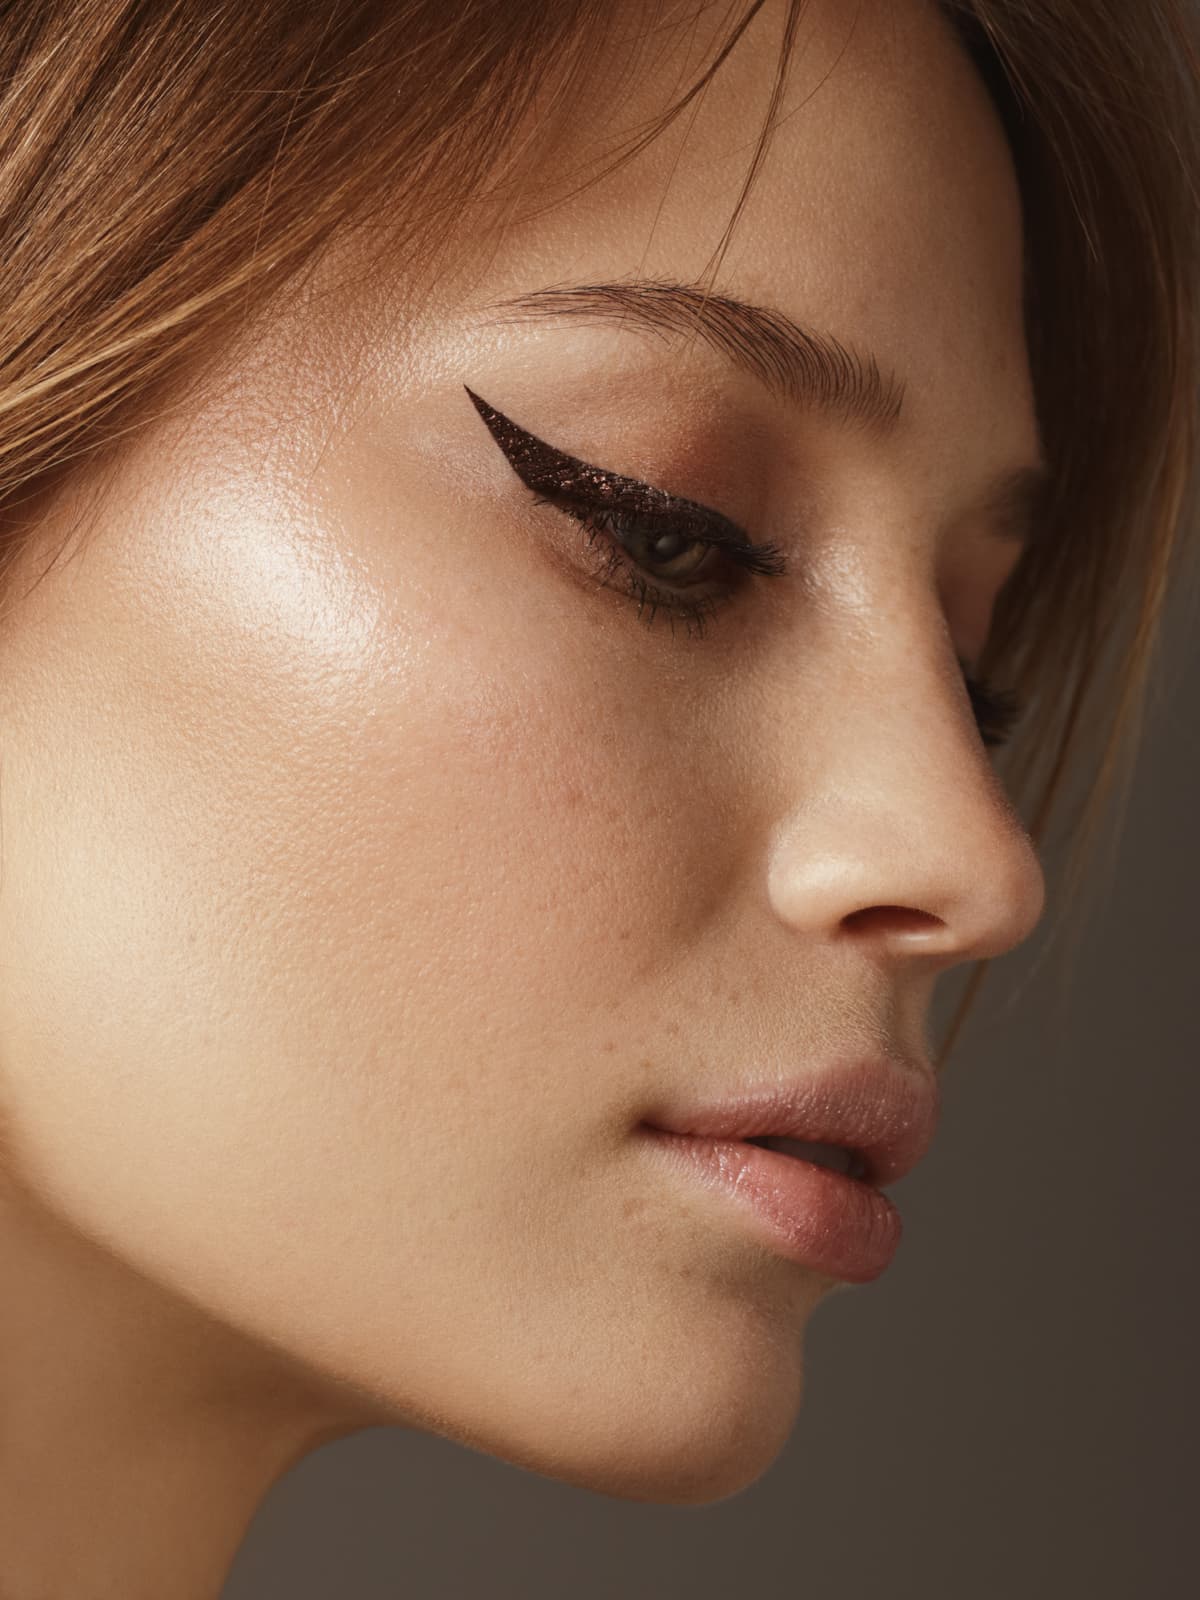 Close-up portrait of beautiful woman with cat eye eyeliner